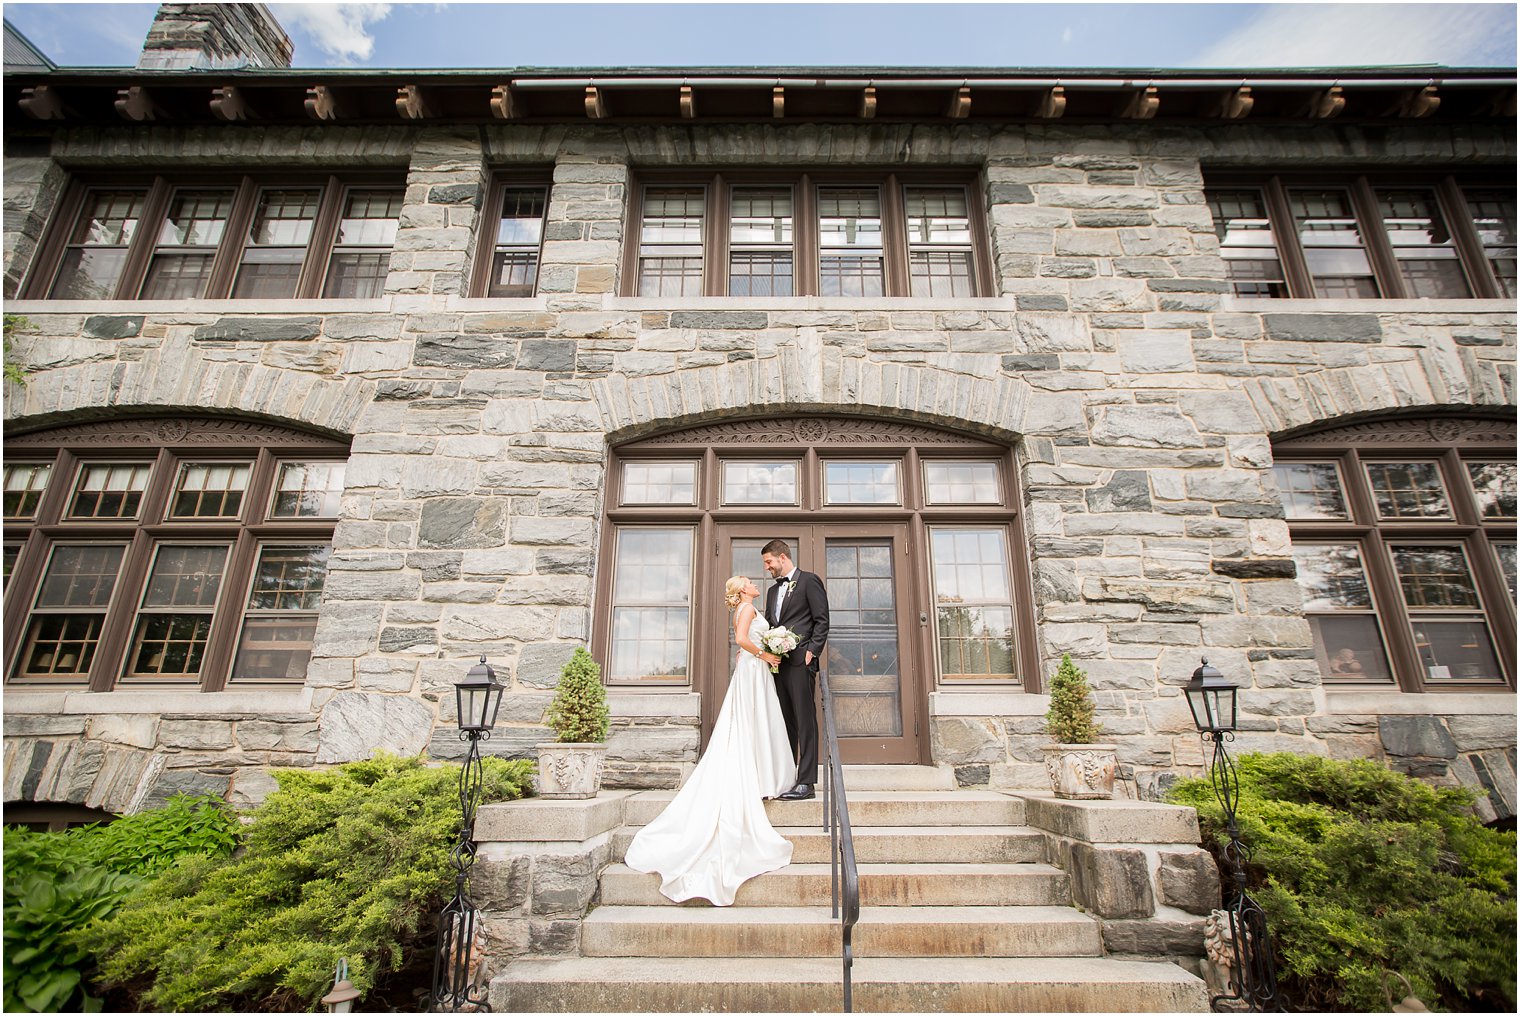 Elegant wedding photos at Castle Hill Resort and Spa